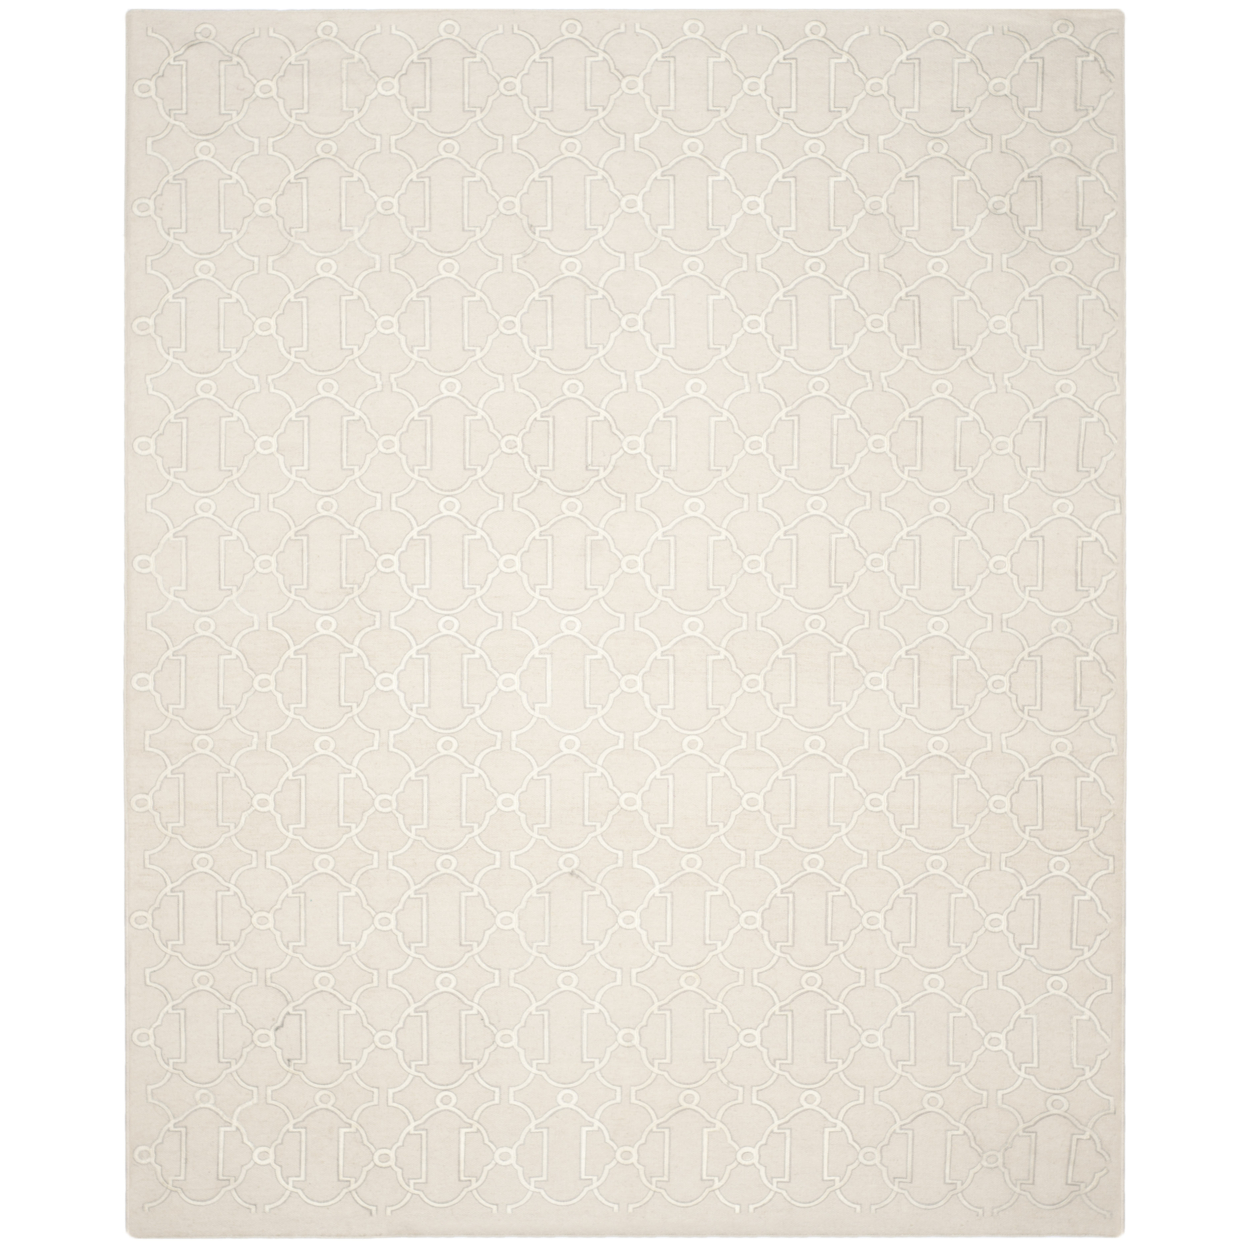 SAFAVIEH Dhurries Collection DHU643A Handwoven Beige Rug - 8' X 10'